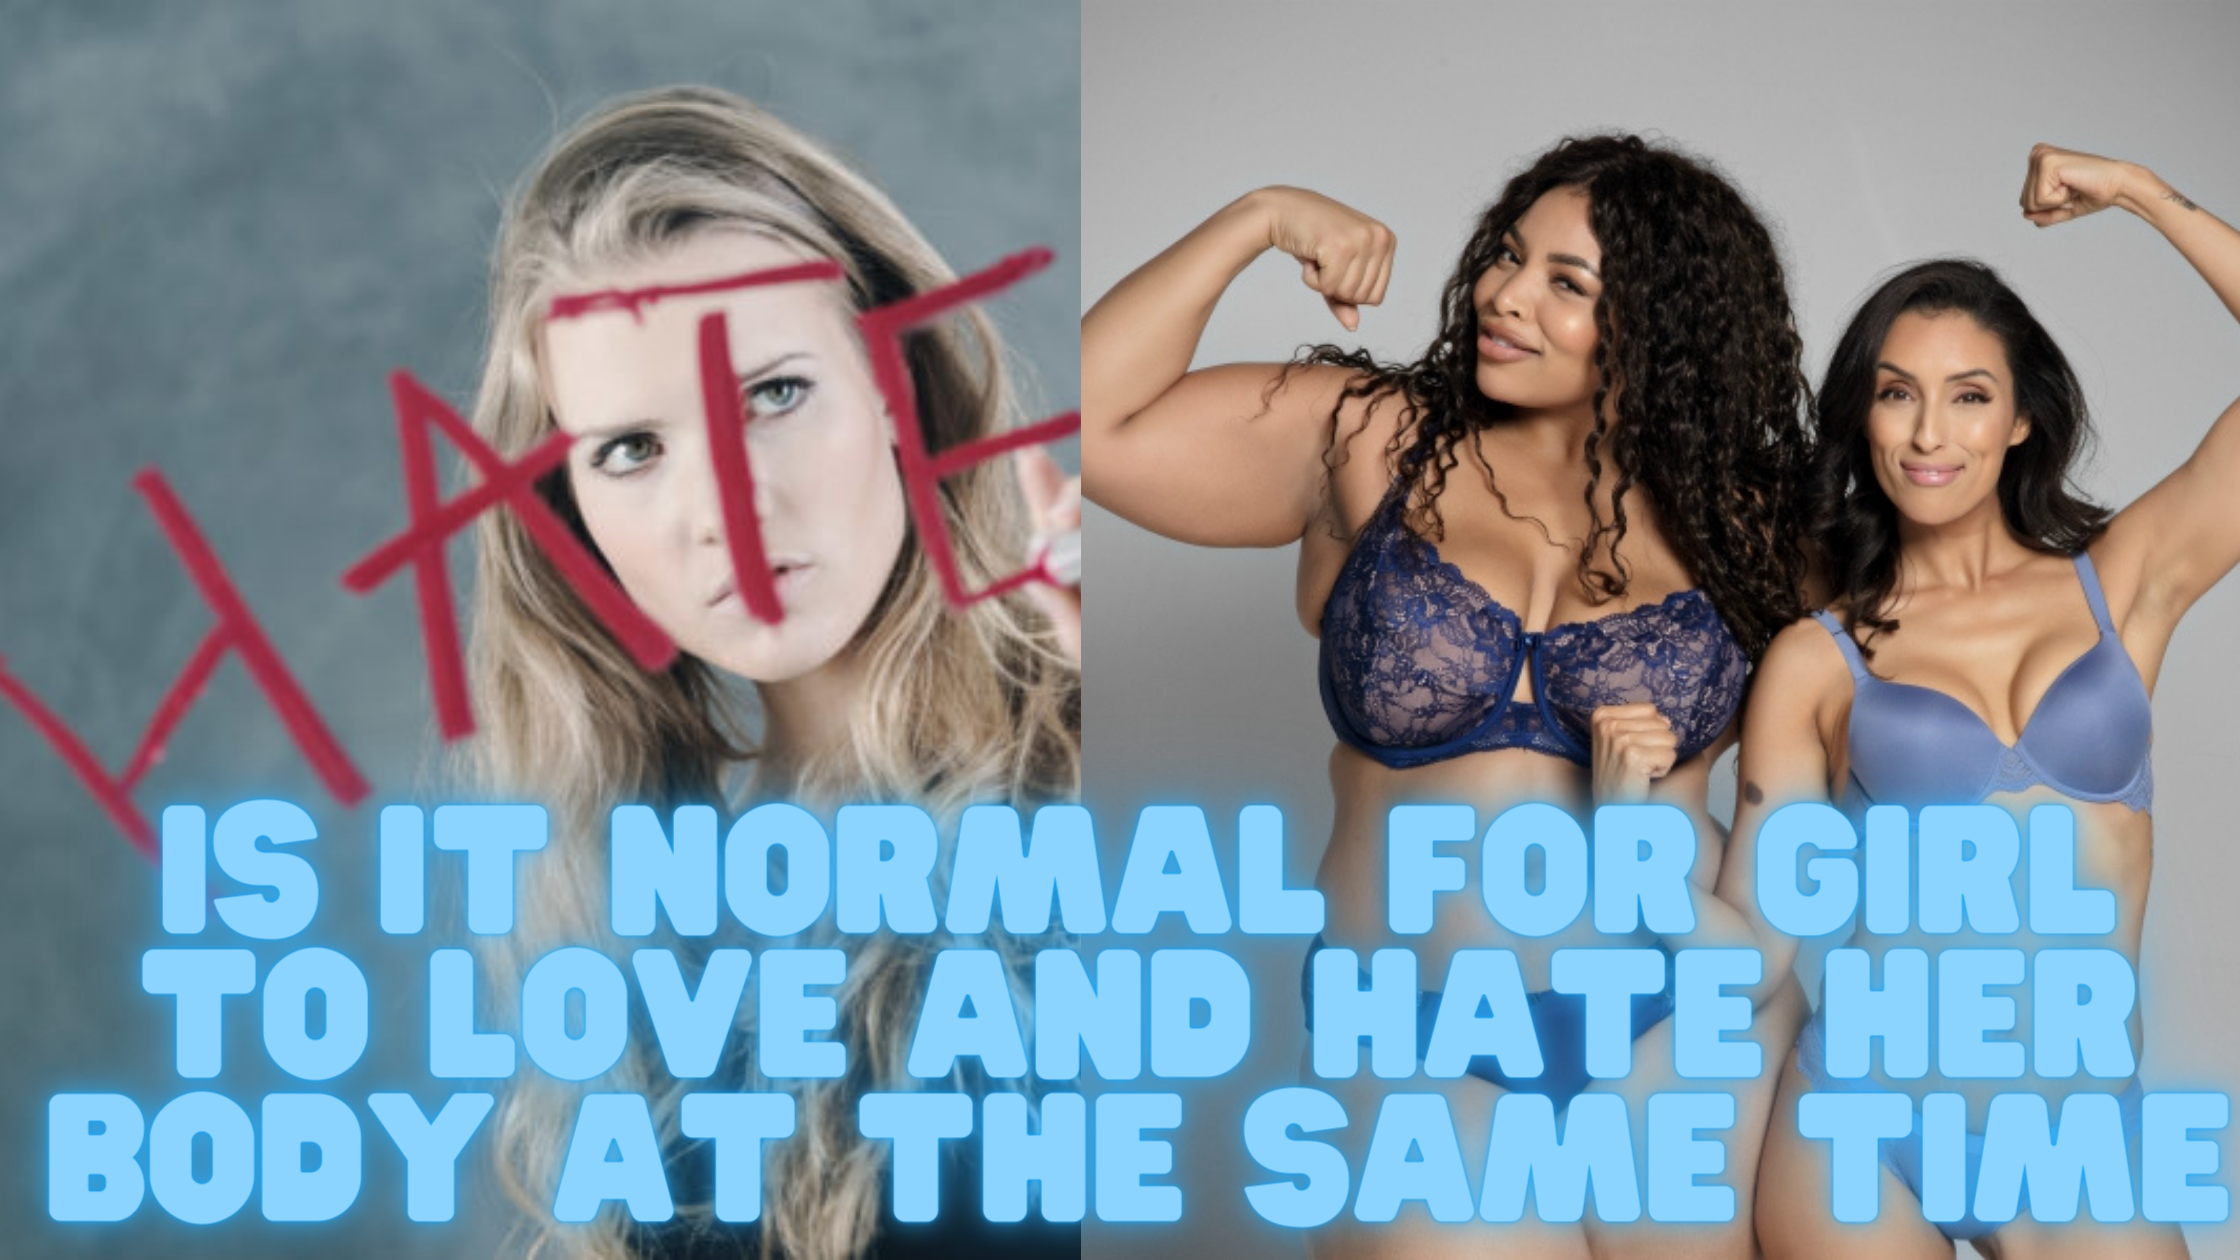 Loving your body: Is it normal for girl to love and hate her body at the same time